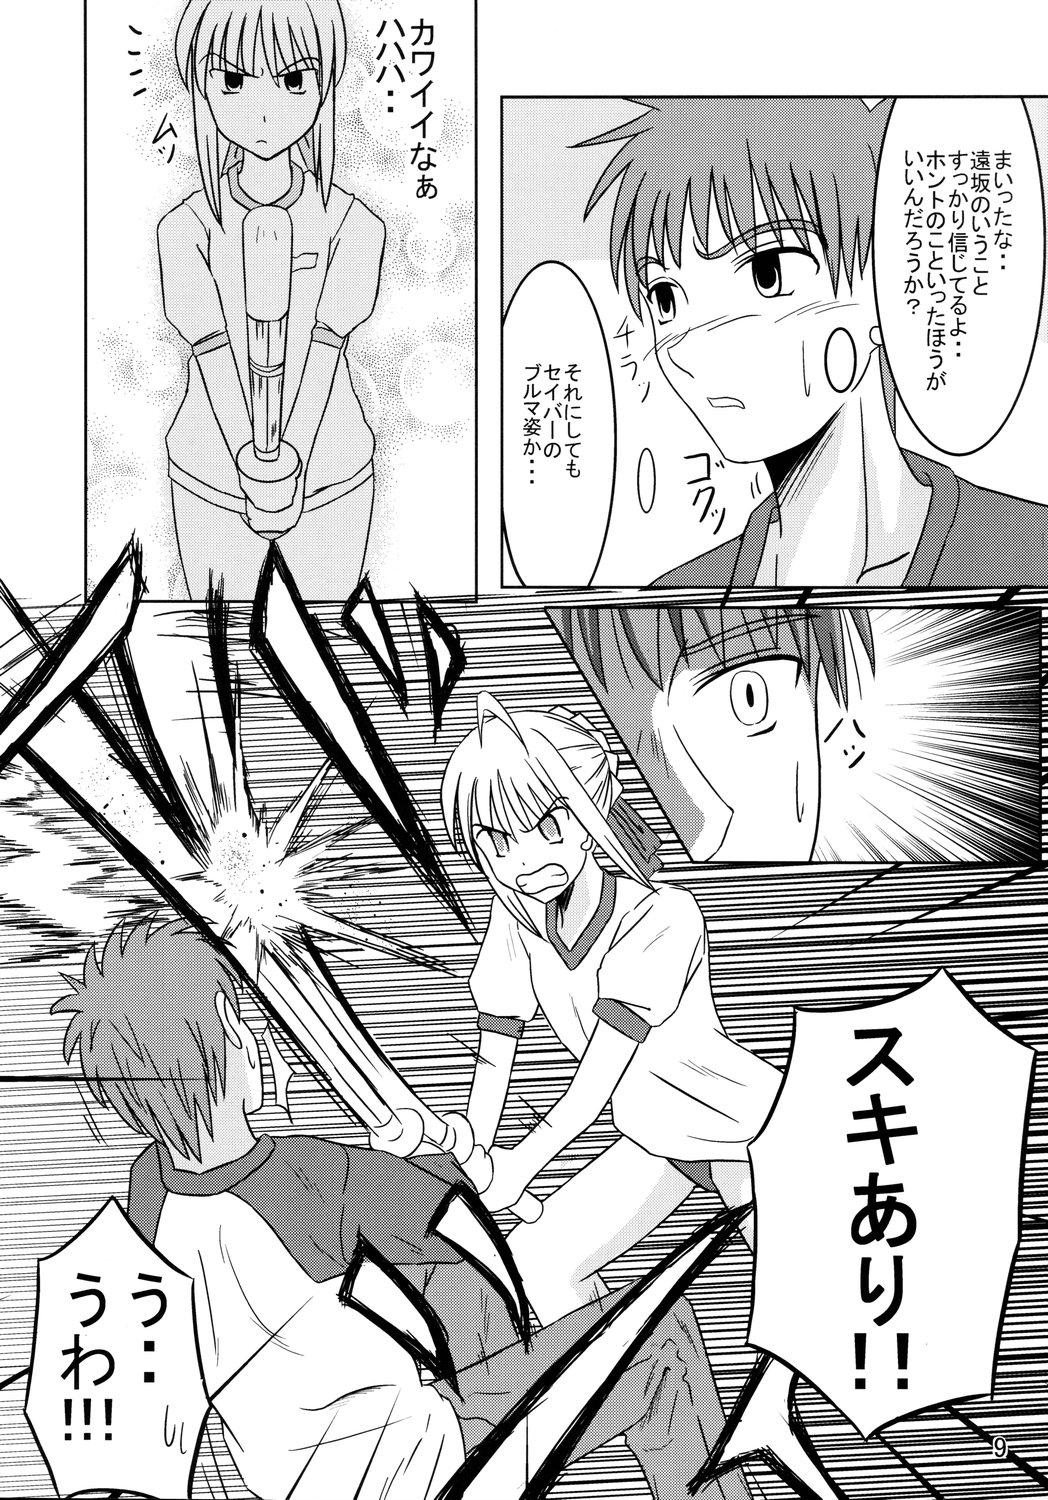 Tanga Saber Of Sanity - Fate stay night Shower - Page 8